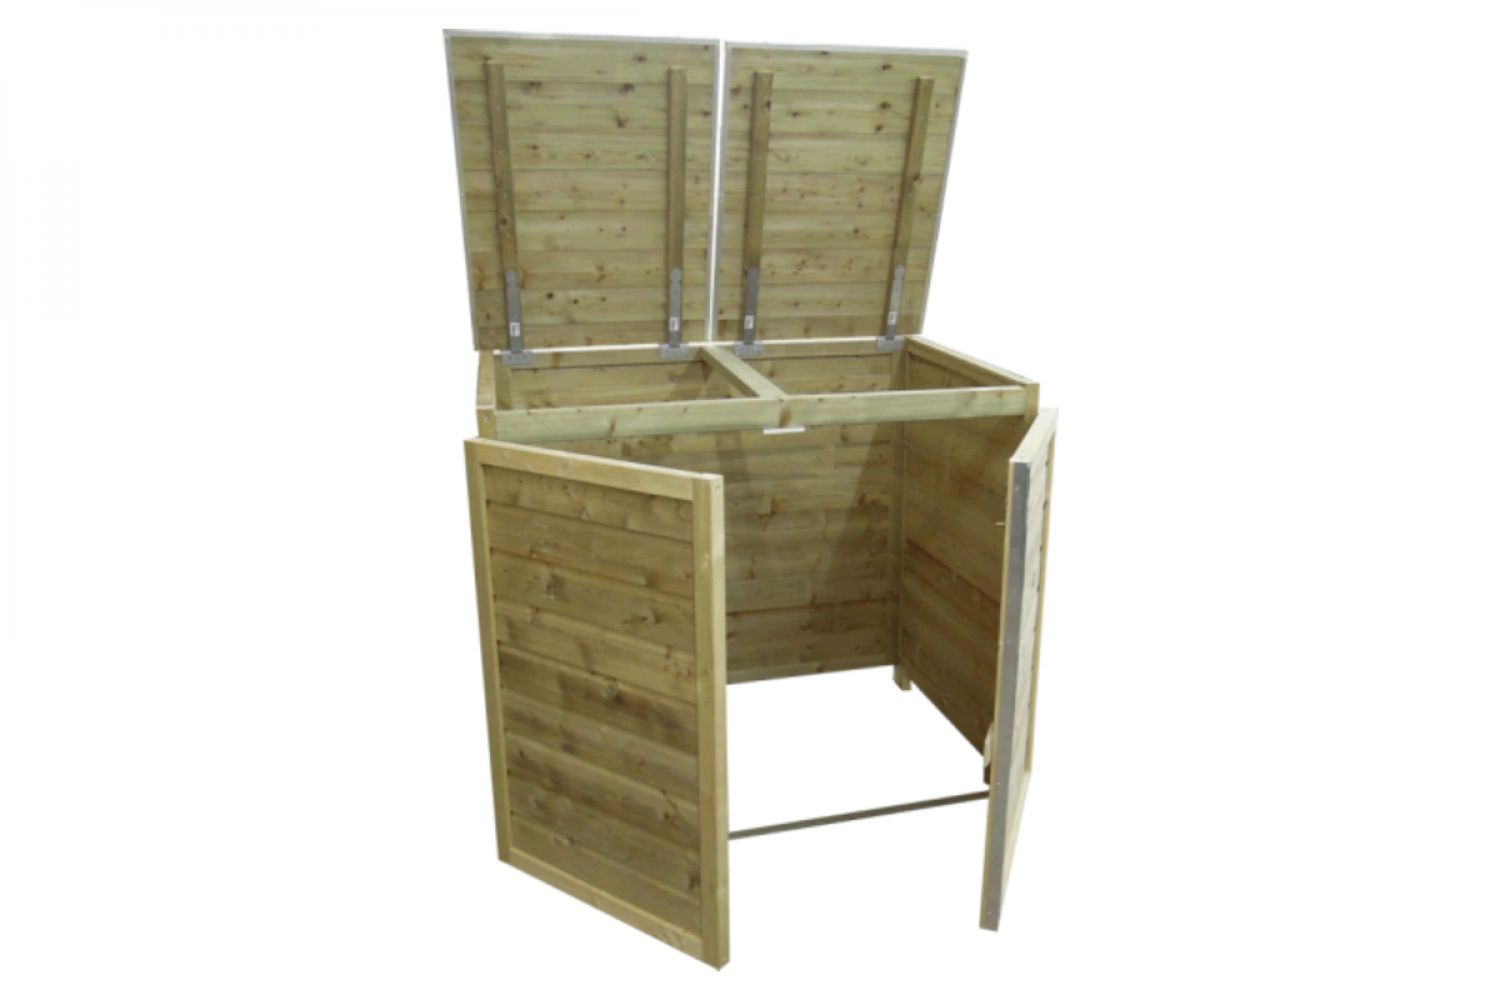 Containerberging 125x65x108,5 cm - 120L